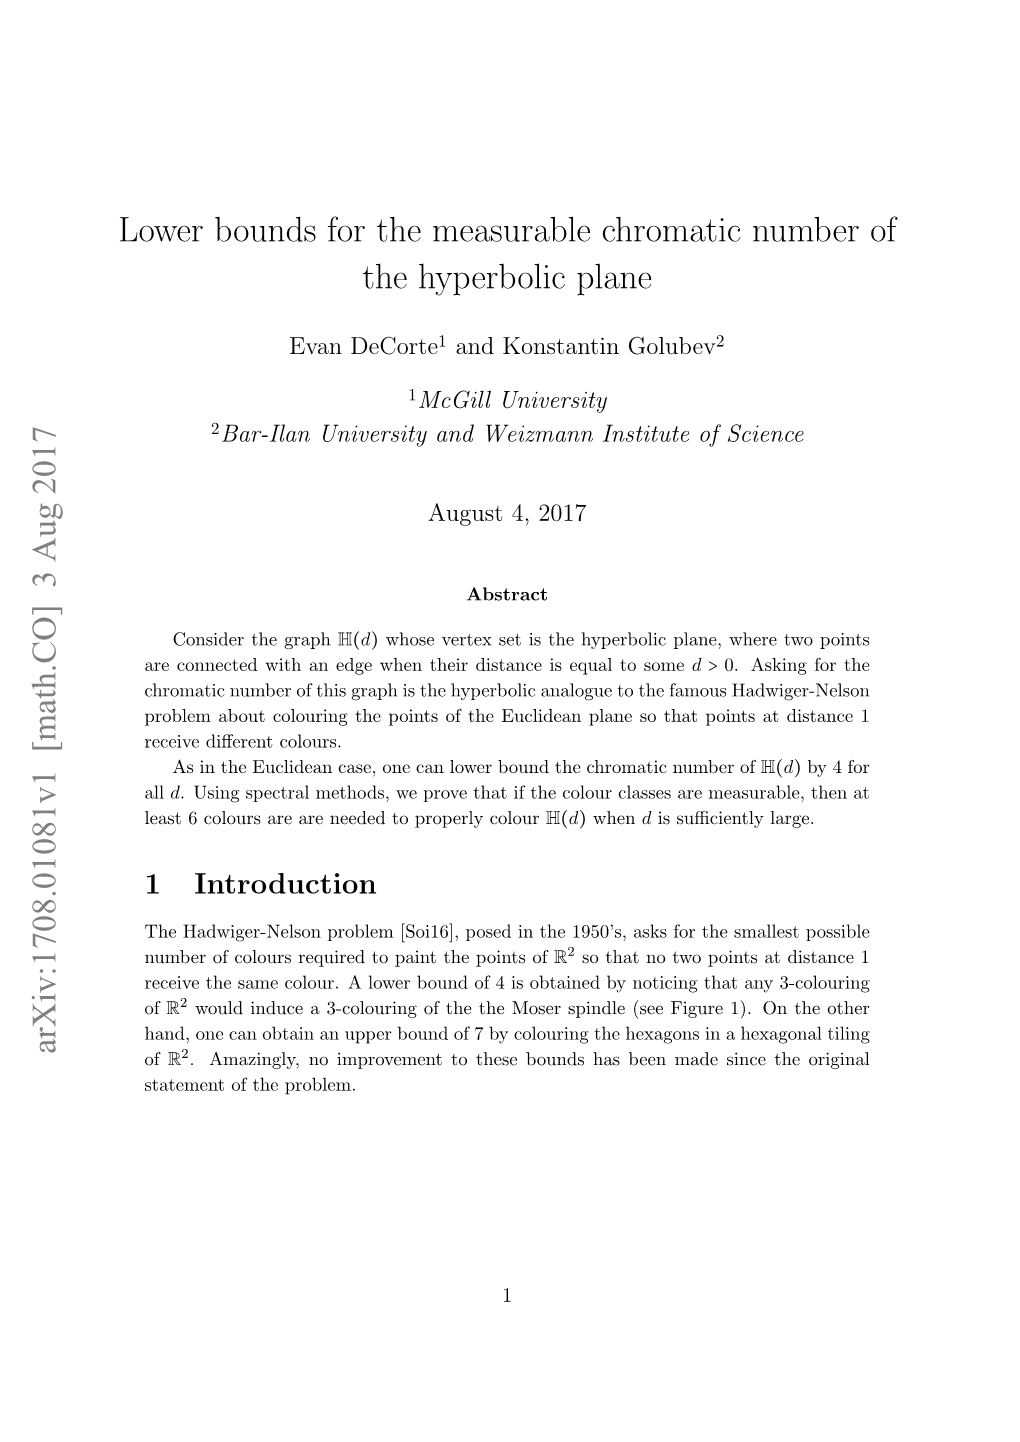 Lower Bounds for the Measurable Chromatic Number of the Hyperbolic Plane